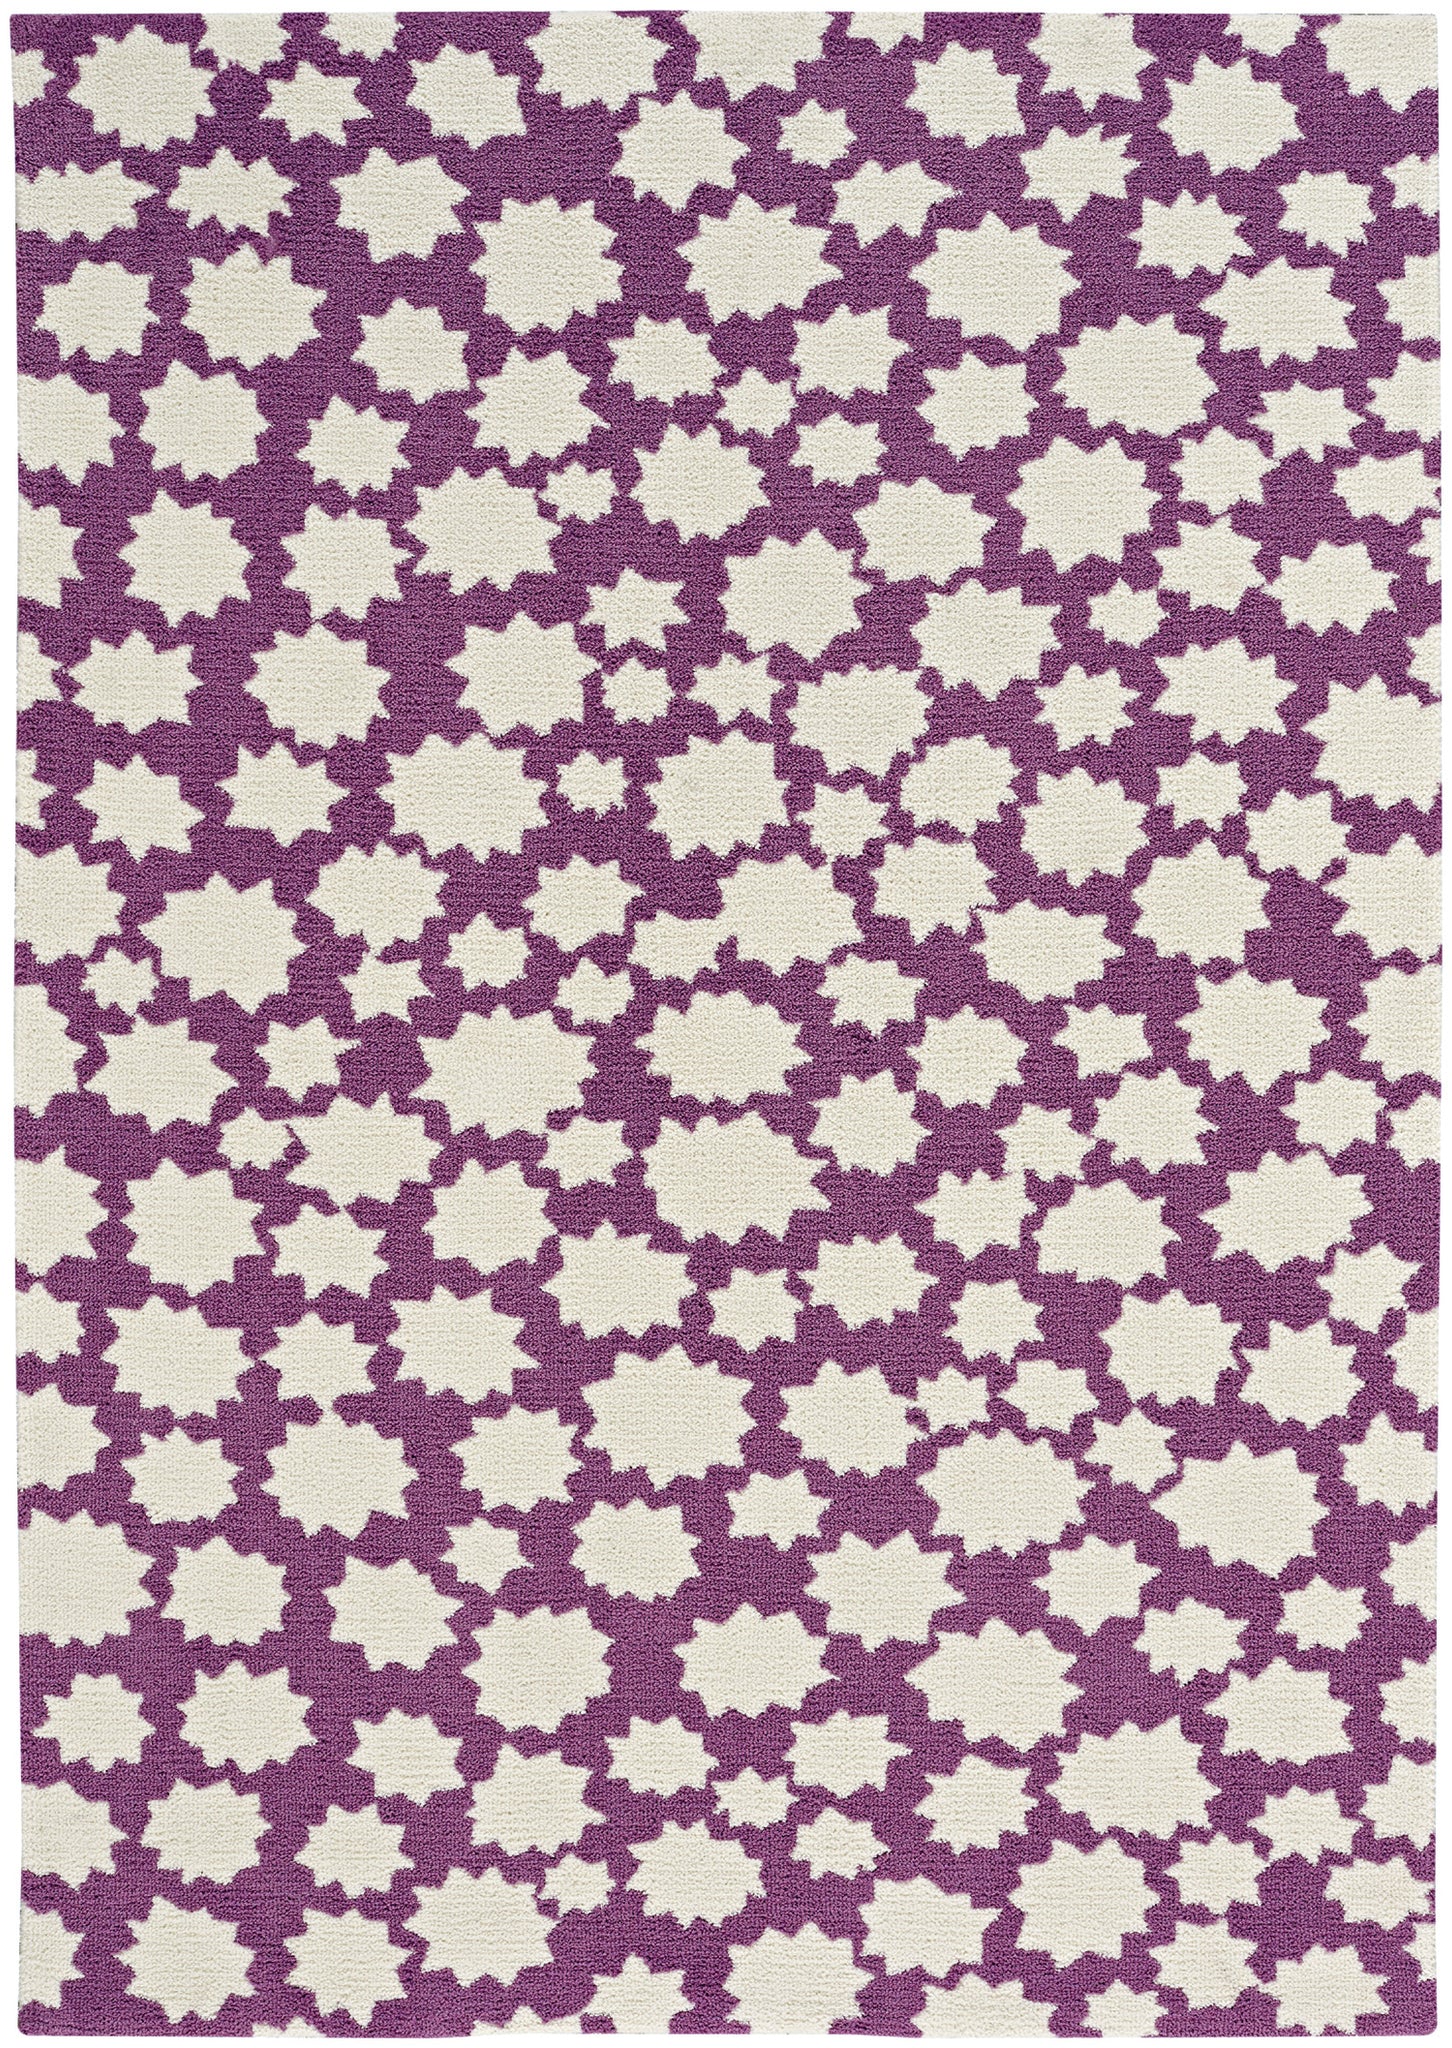 Capel Sky Heavenly 6301 Purple 465 Area Rug by Hable Construction main image